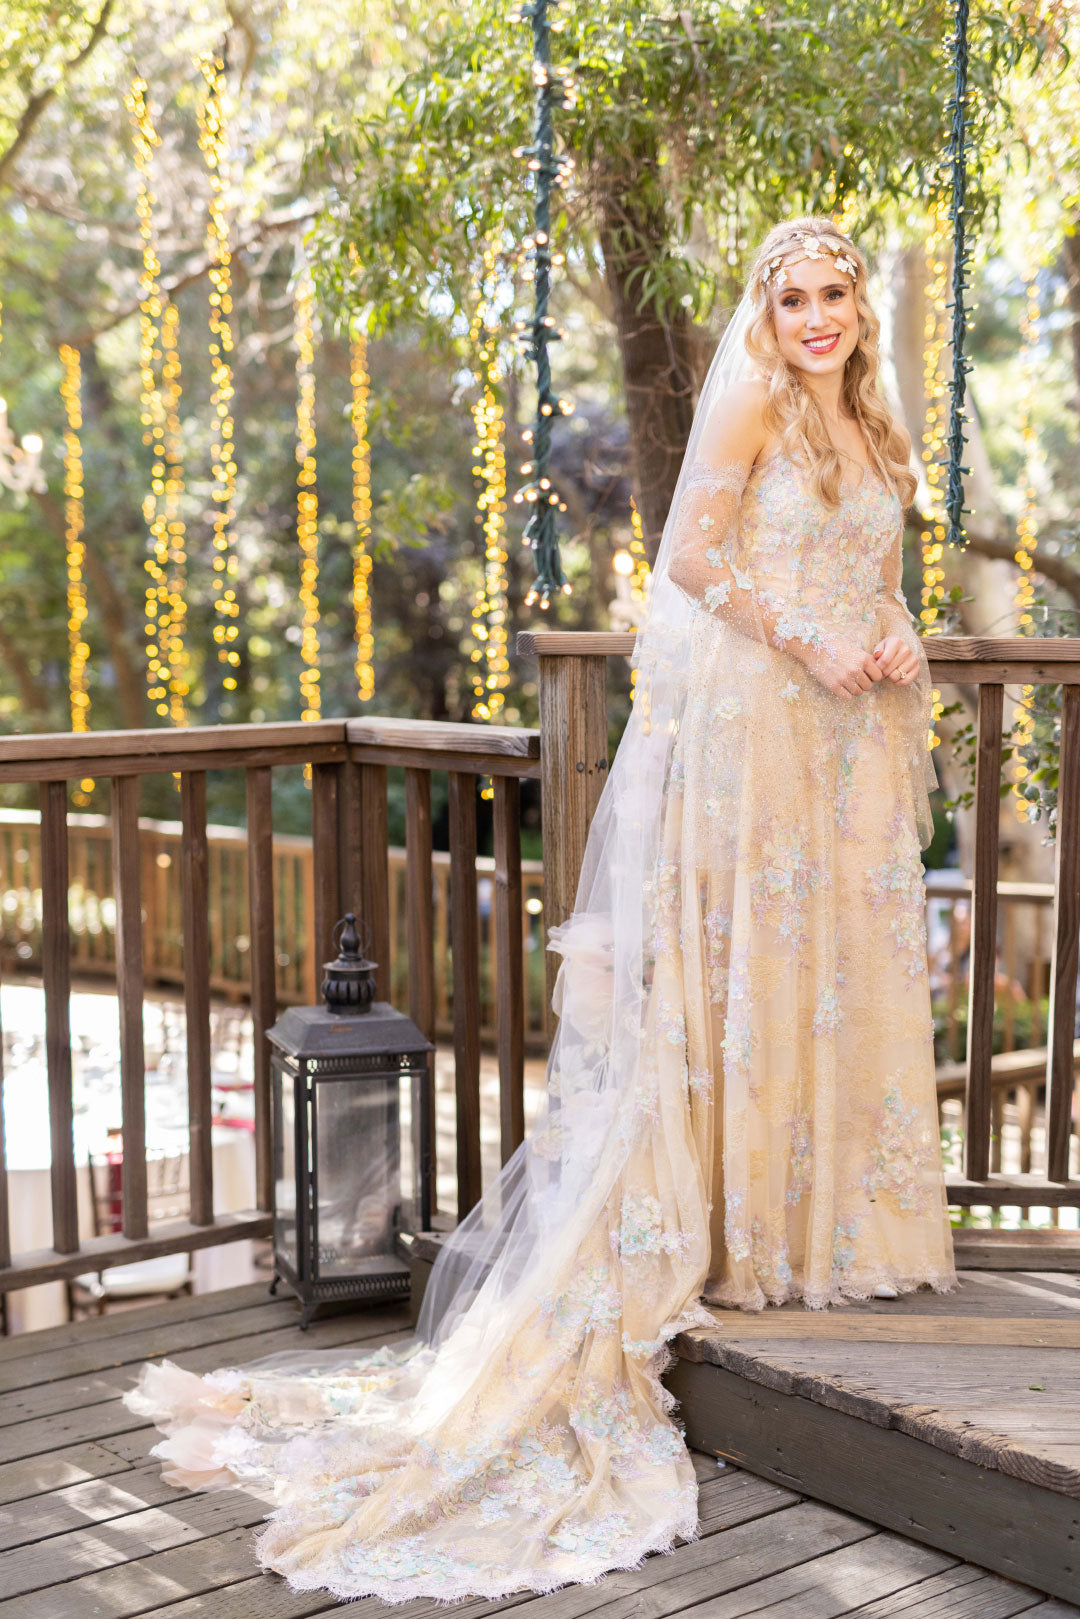 Bride Wearing Ophelia Couture Wedding Dress with Color Designed by Claire Pettibone